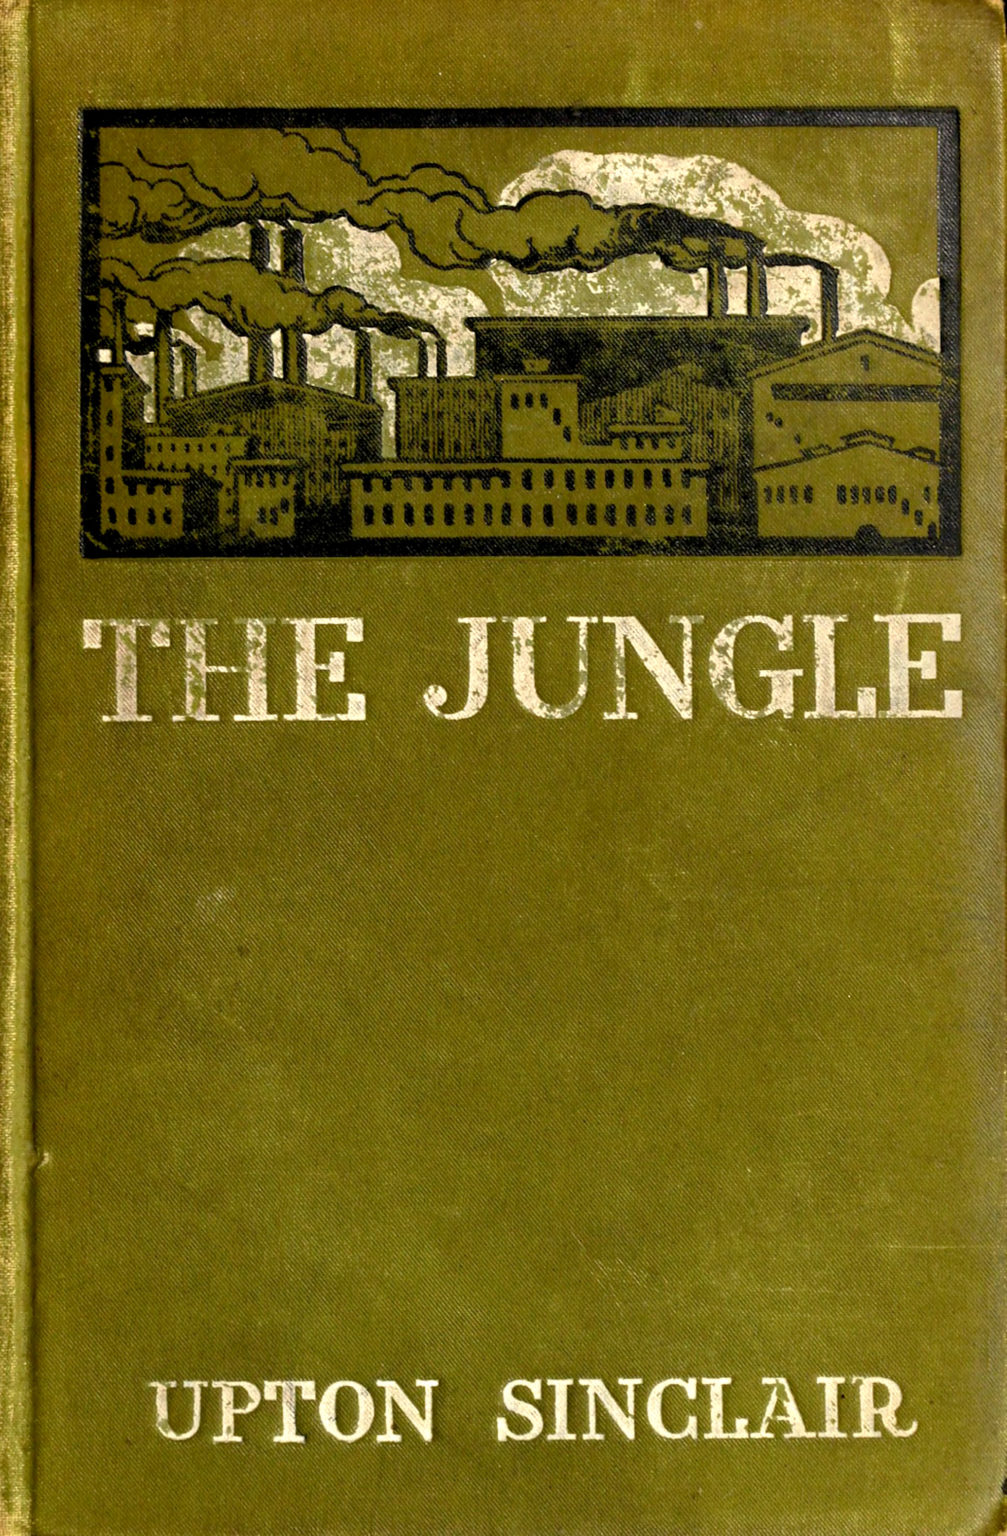 The Jungle by muckraker Upton Sinclair, 1906